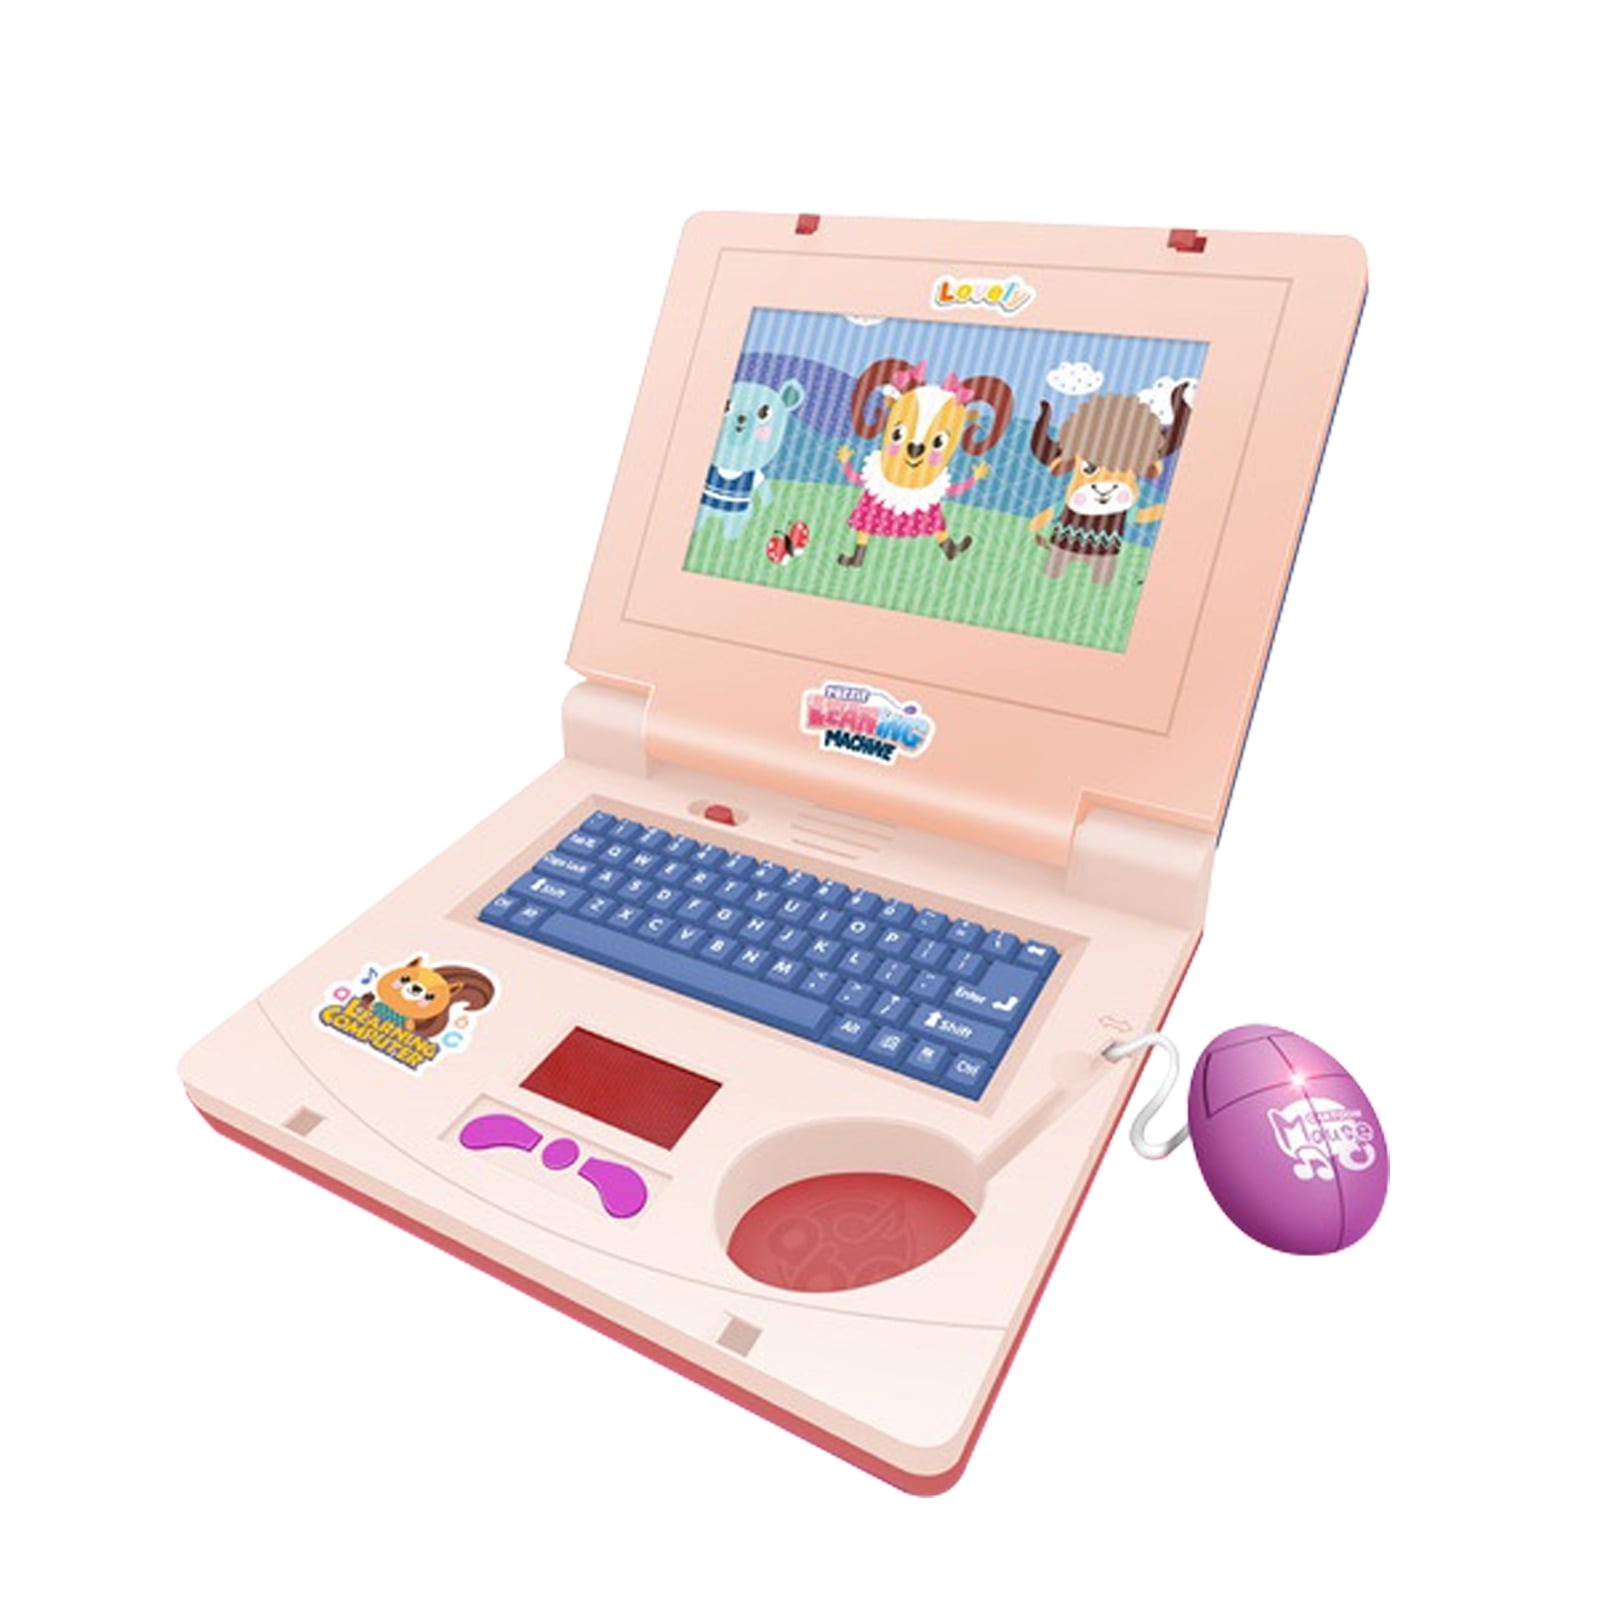  LEXiBOOK - Unicorn Educational and Bilingual Laptop  Spanish/English - Toy for Children with 124 Activities to Learn  Mathematics, Dactylography, Logic, Clock Reading, Play Games and Music -  JC598UNIi2 : Video Games